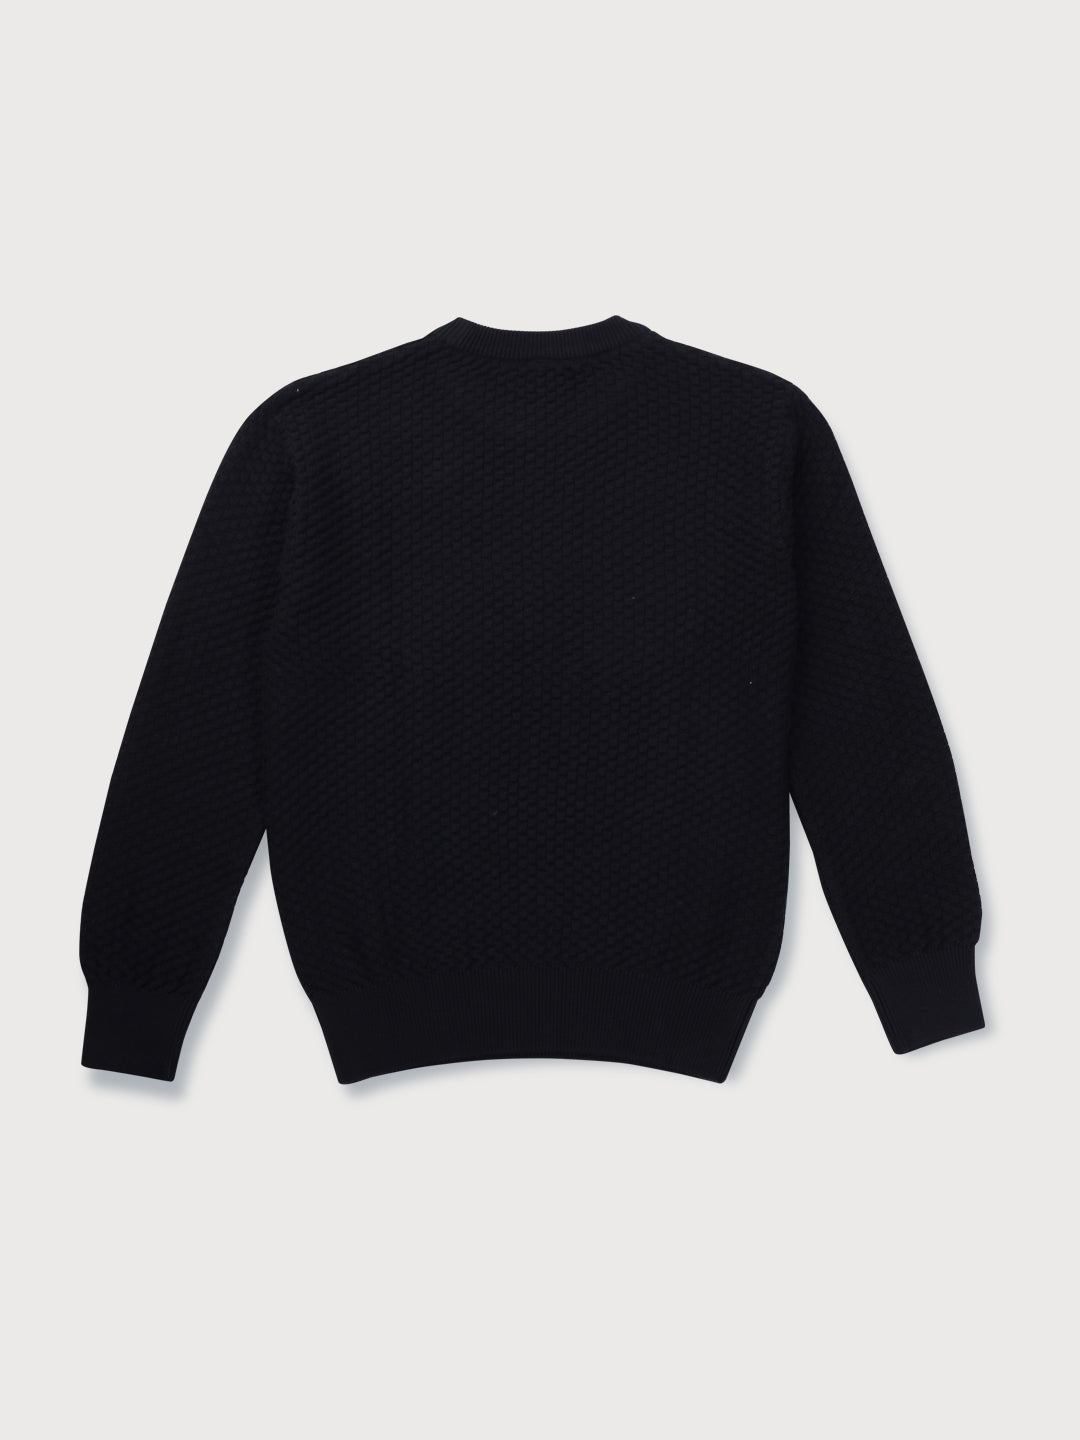 Boys Black Solid Woven Sweater